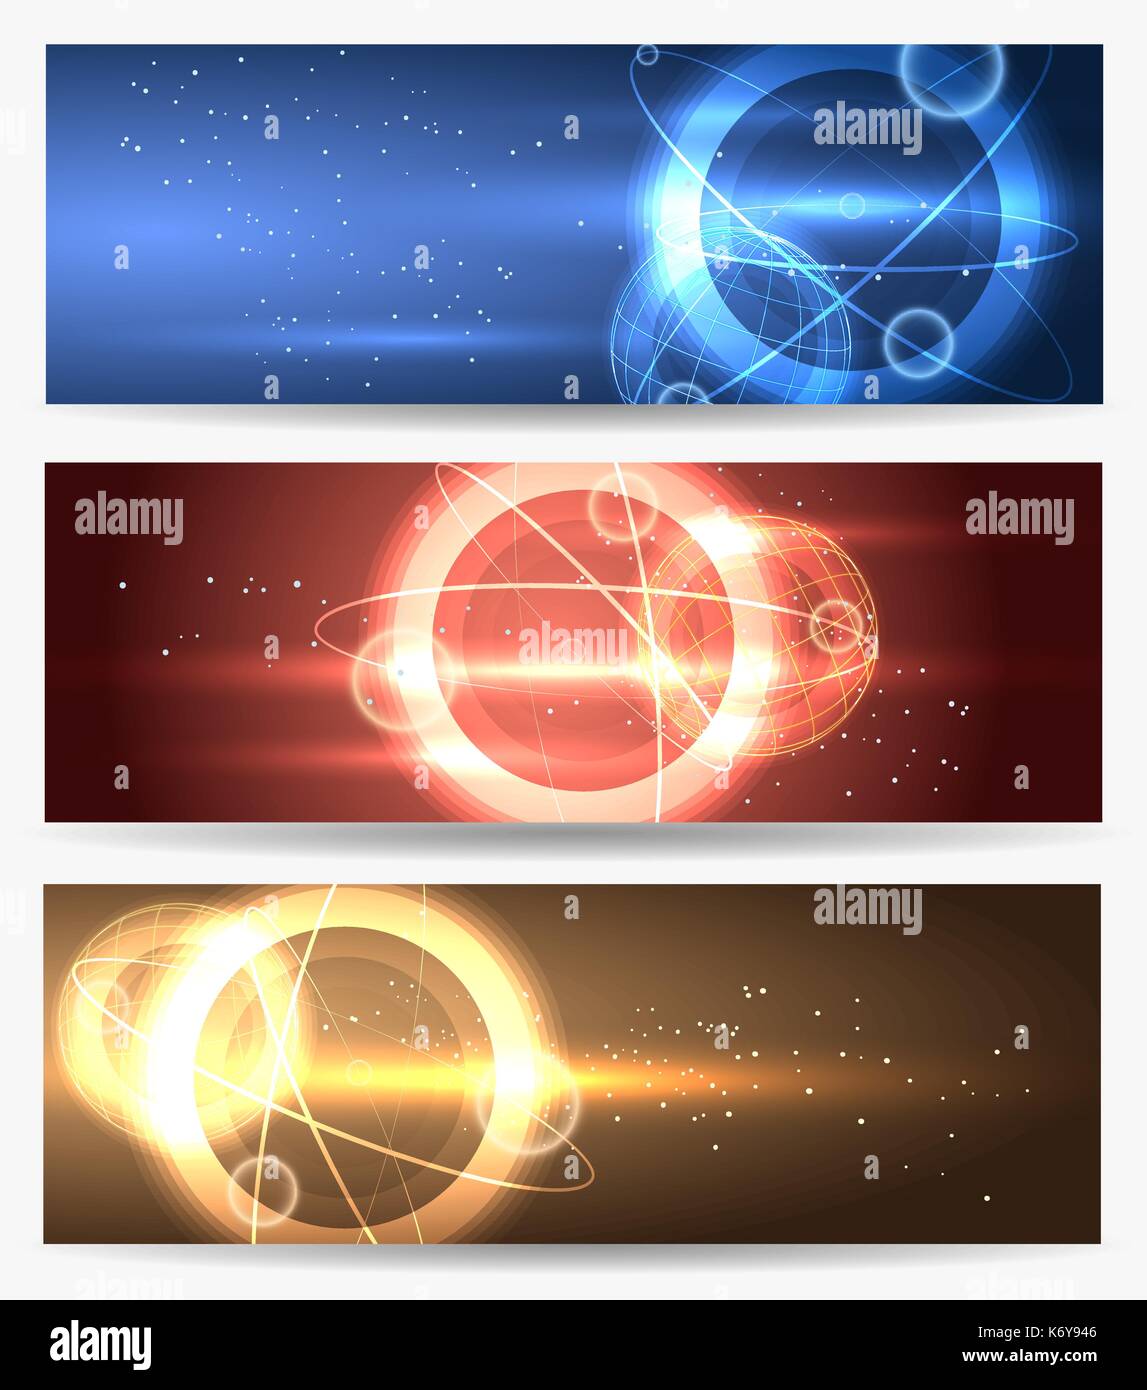 Planets in space banner set. Horizontal banners with glowing planets and spheres. Vector illustration Stock Vector